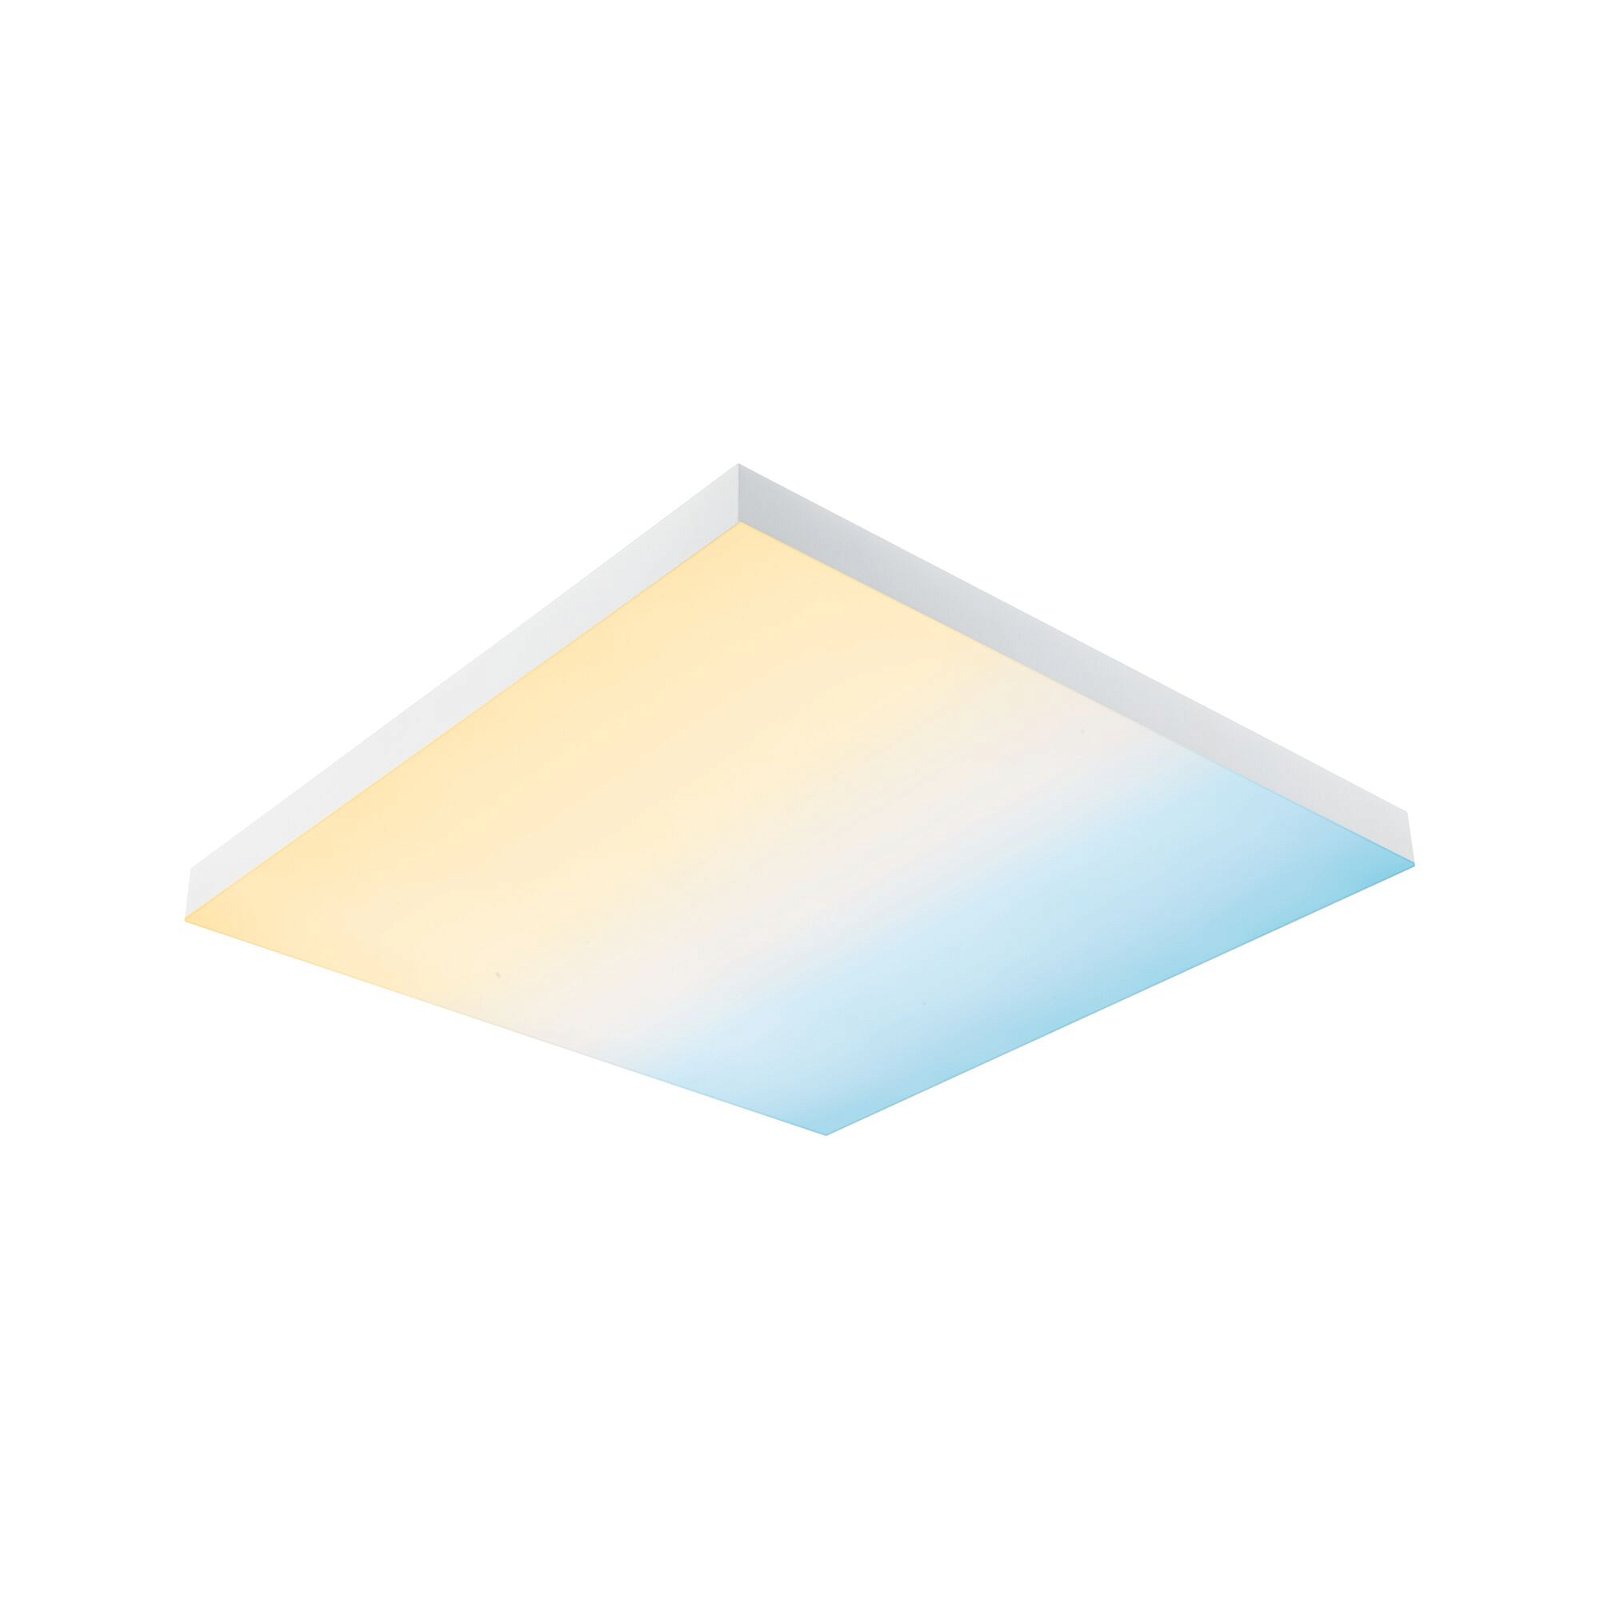 LED Panel Velora Rainbow square 450x450mm RGBW White dimmable